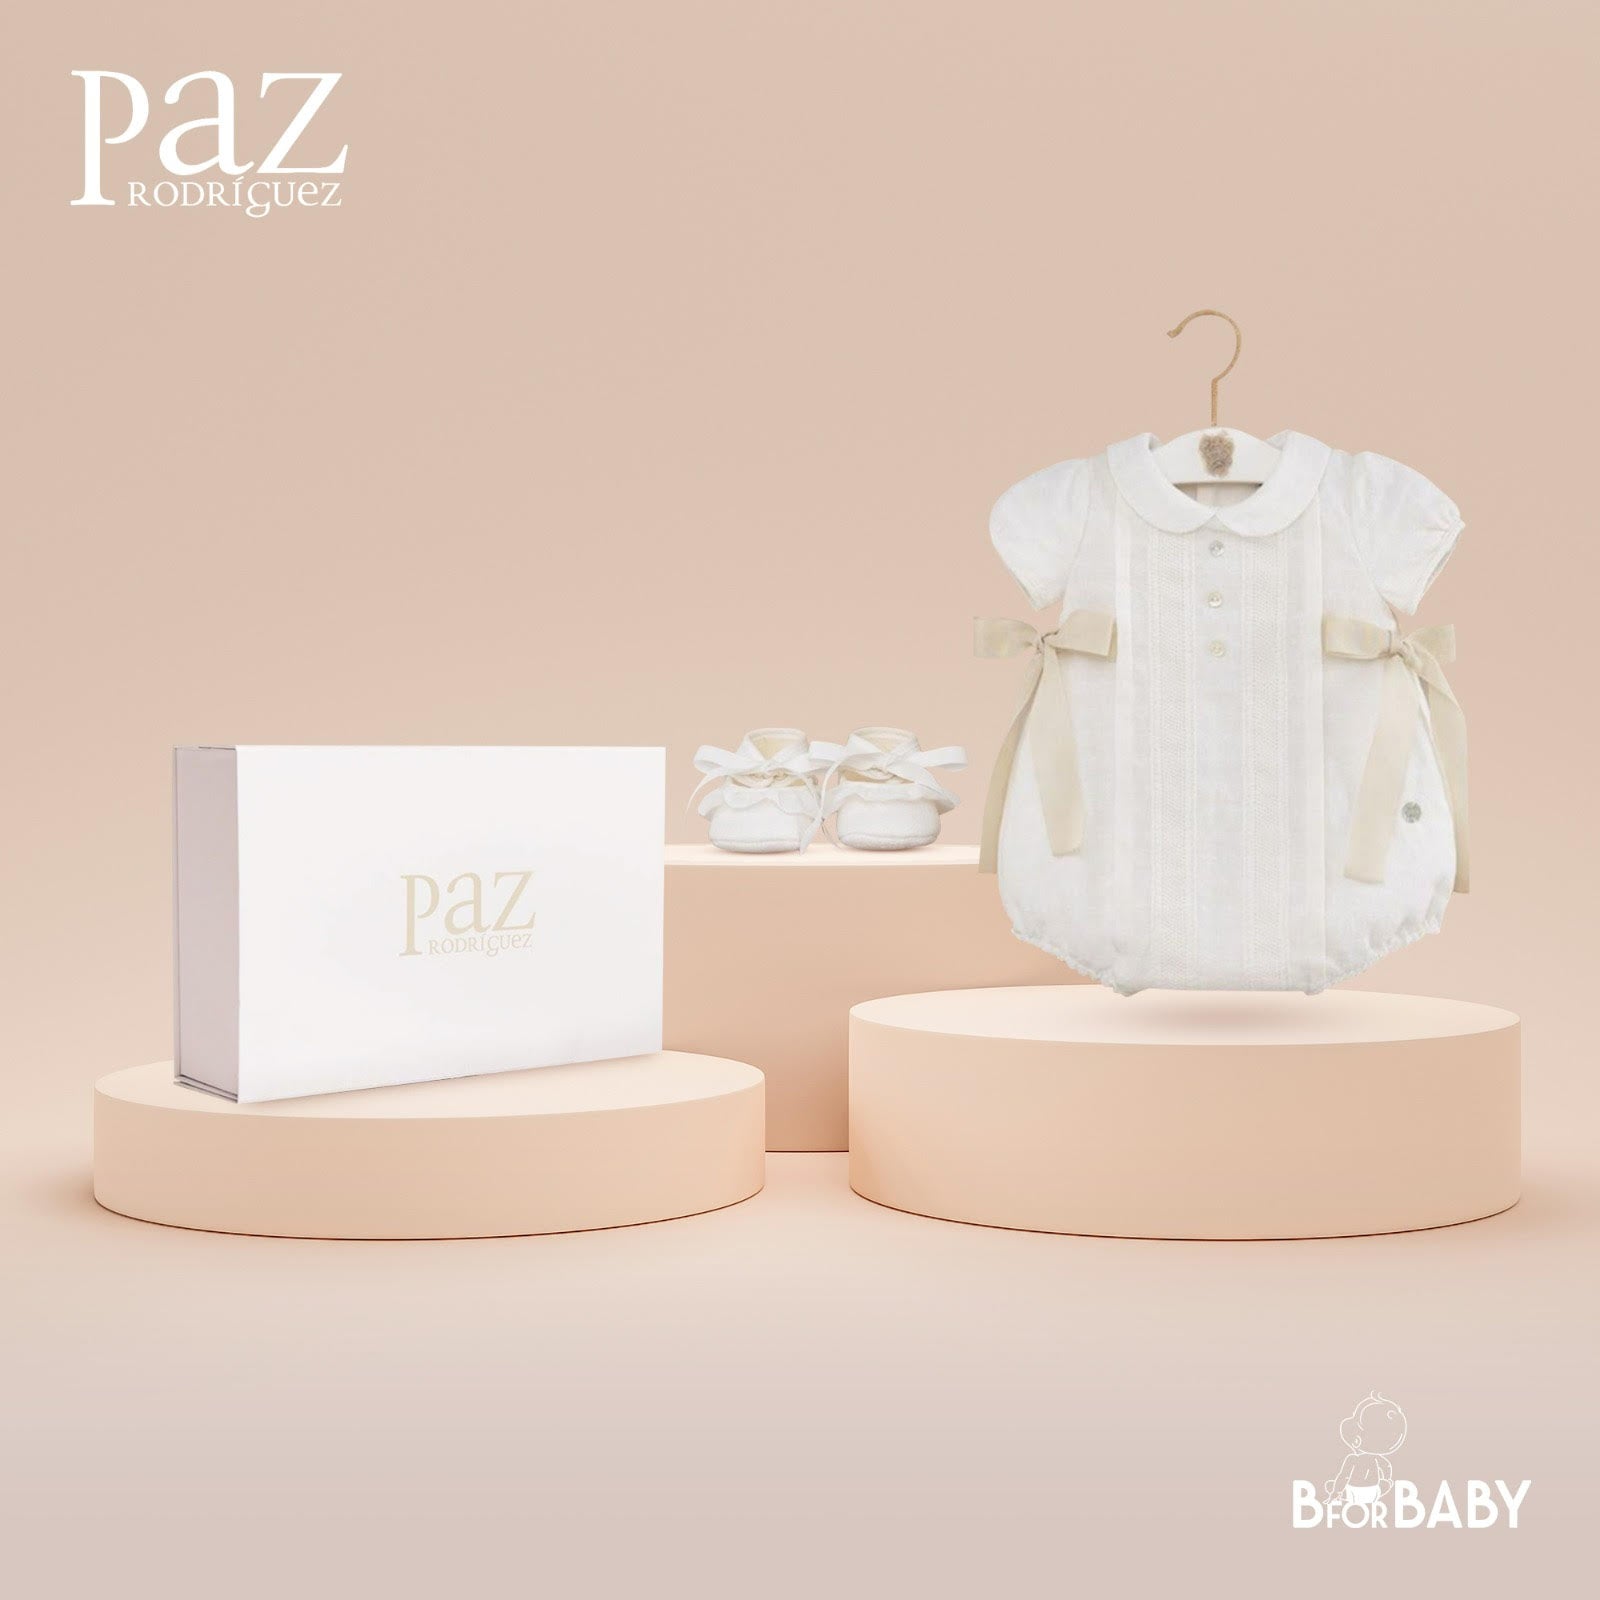 Paz Rodriguez Romper and Shoes 2-Piece Gift Set - Cream